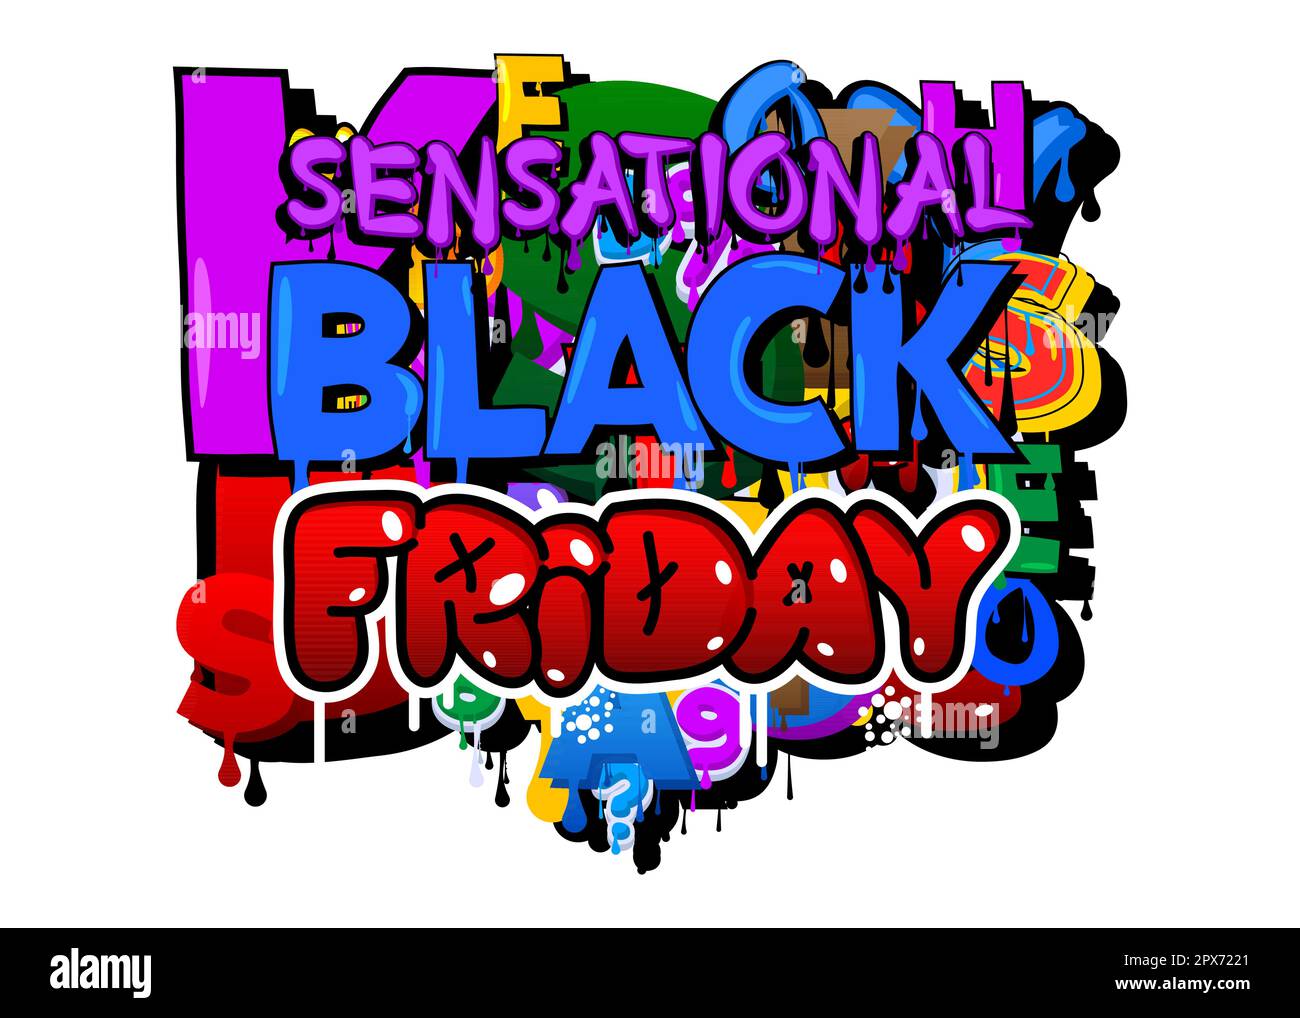 Sensational Black Friday. Graffiti tag. Abstract modern street art decoration performed in urban painting style. Stock Vector